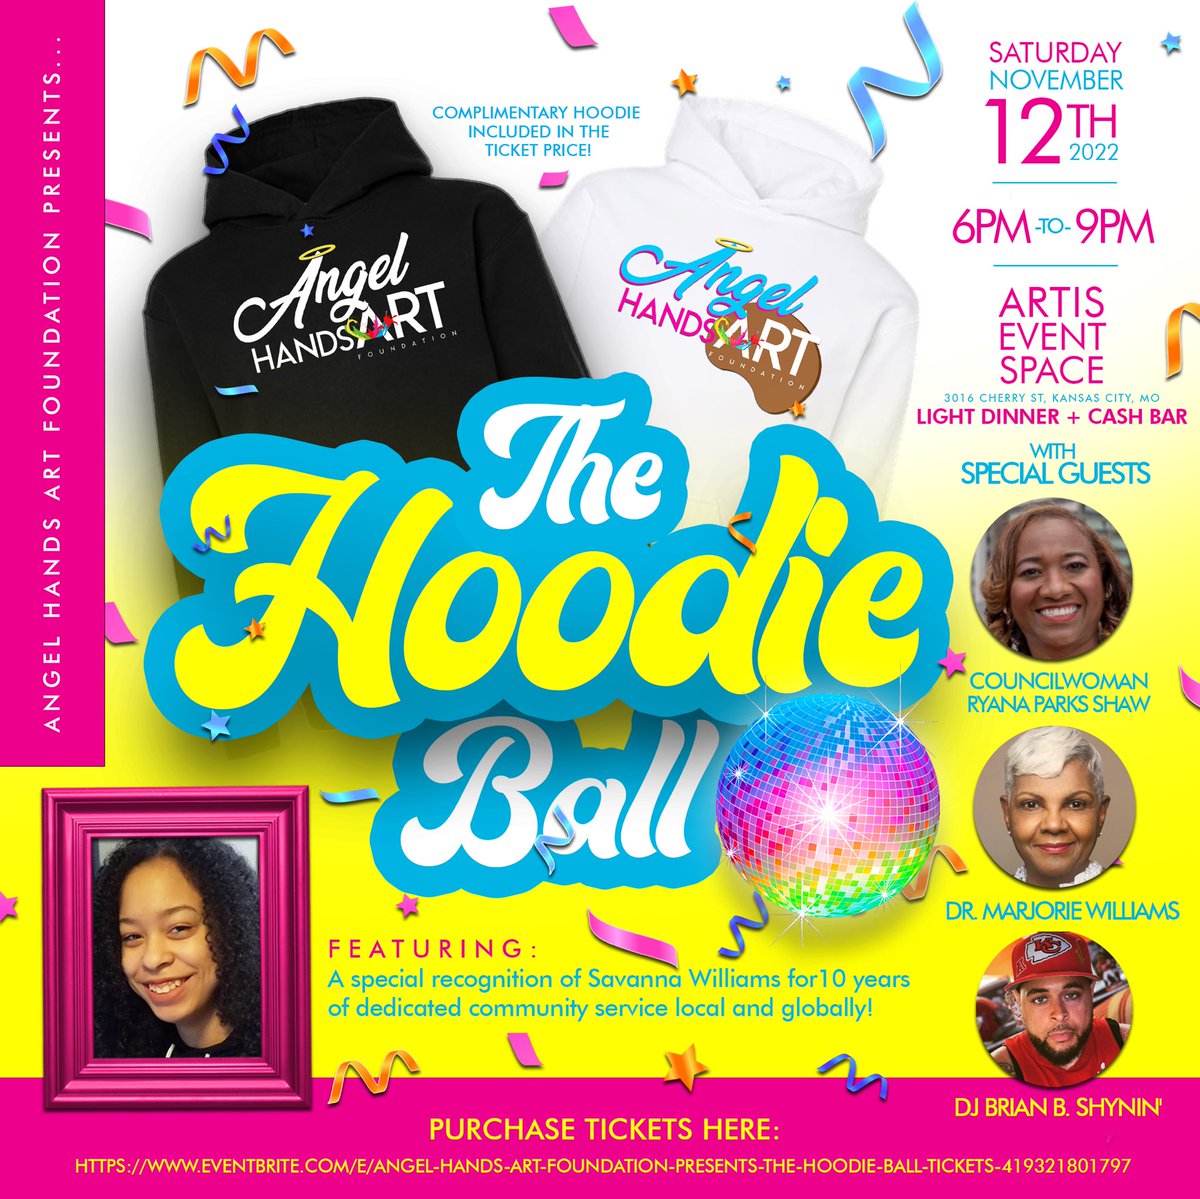 It’s Hoodie Season and THIS is the Hoodie that helps underserved children in KC and around the globe!!!!

Get yours now for FREE (available in many colors) when you purchase your ticket to the Inaugural Angel Hands Art Foundation #HoodieBall !!!